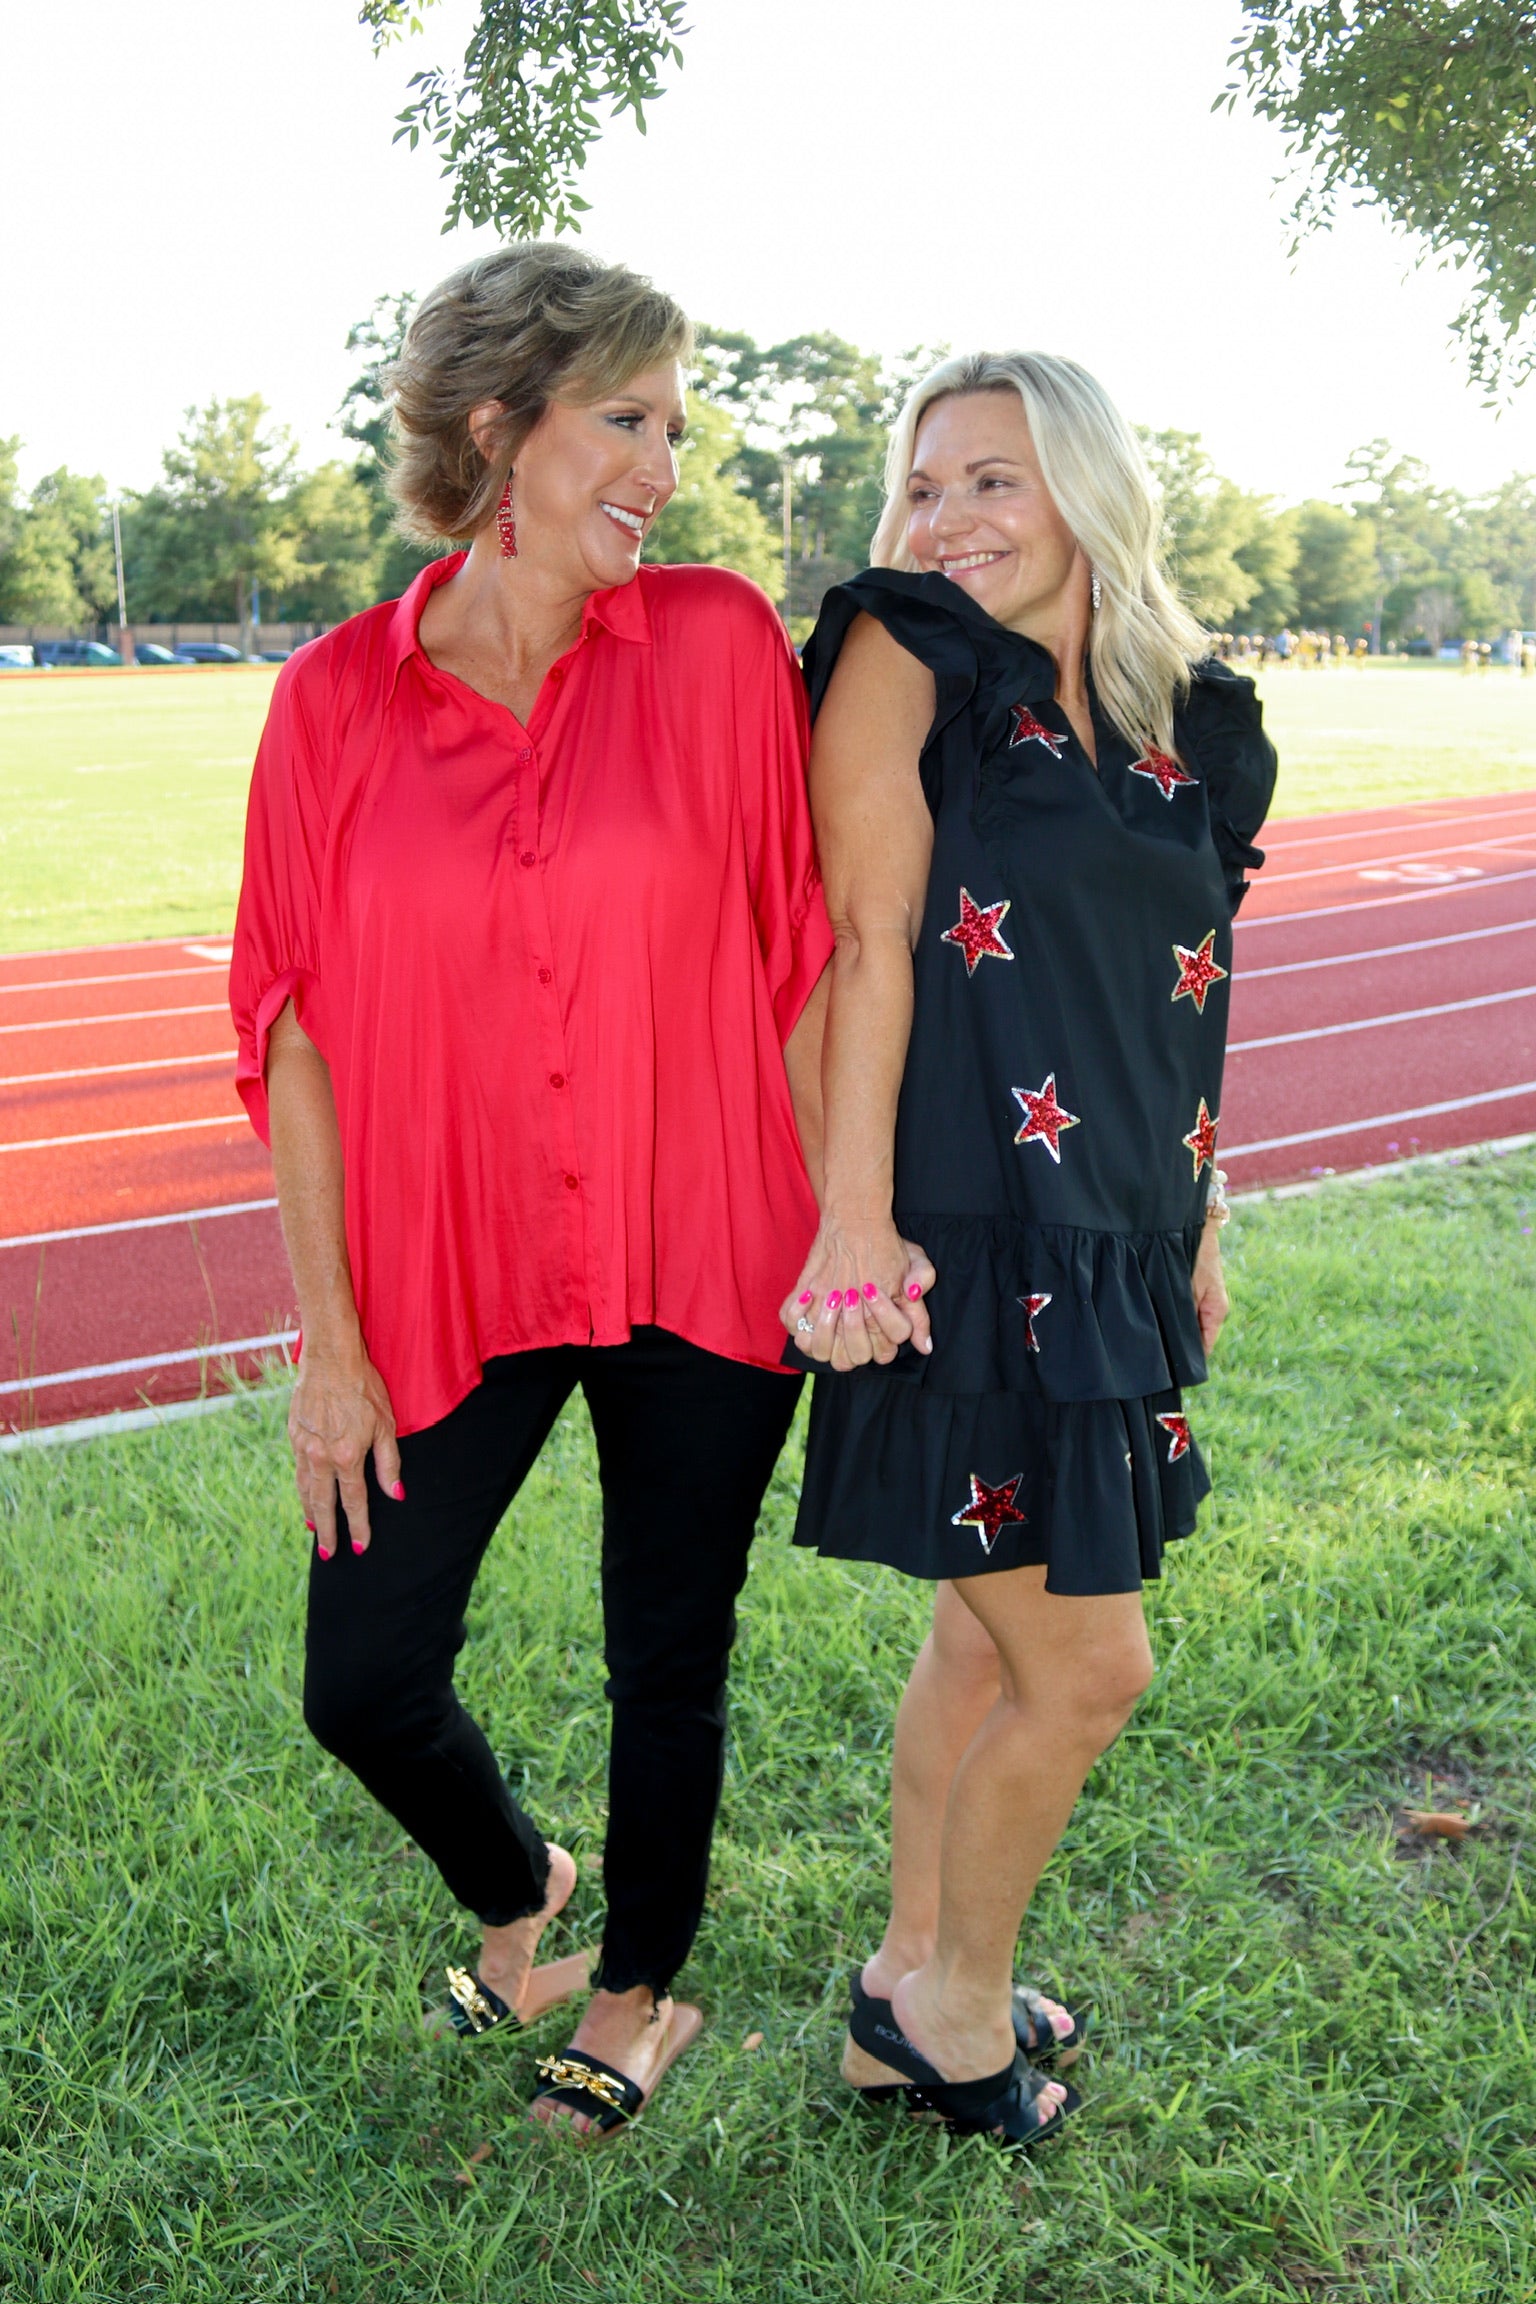 star player dress dress with stars on it game day dresses dress for georgia game dress for game days dress for football games 